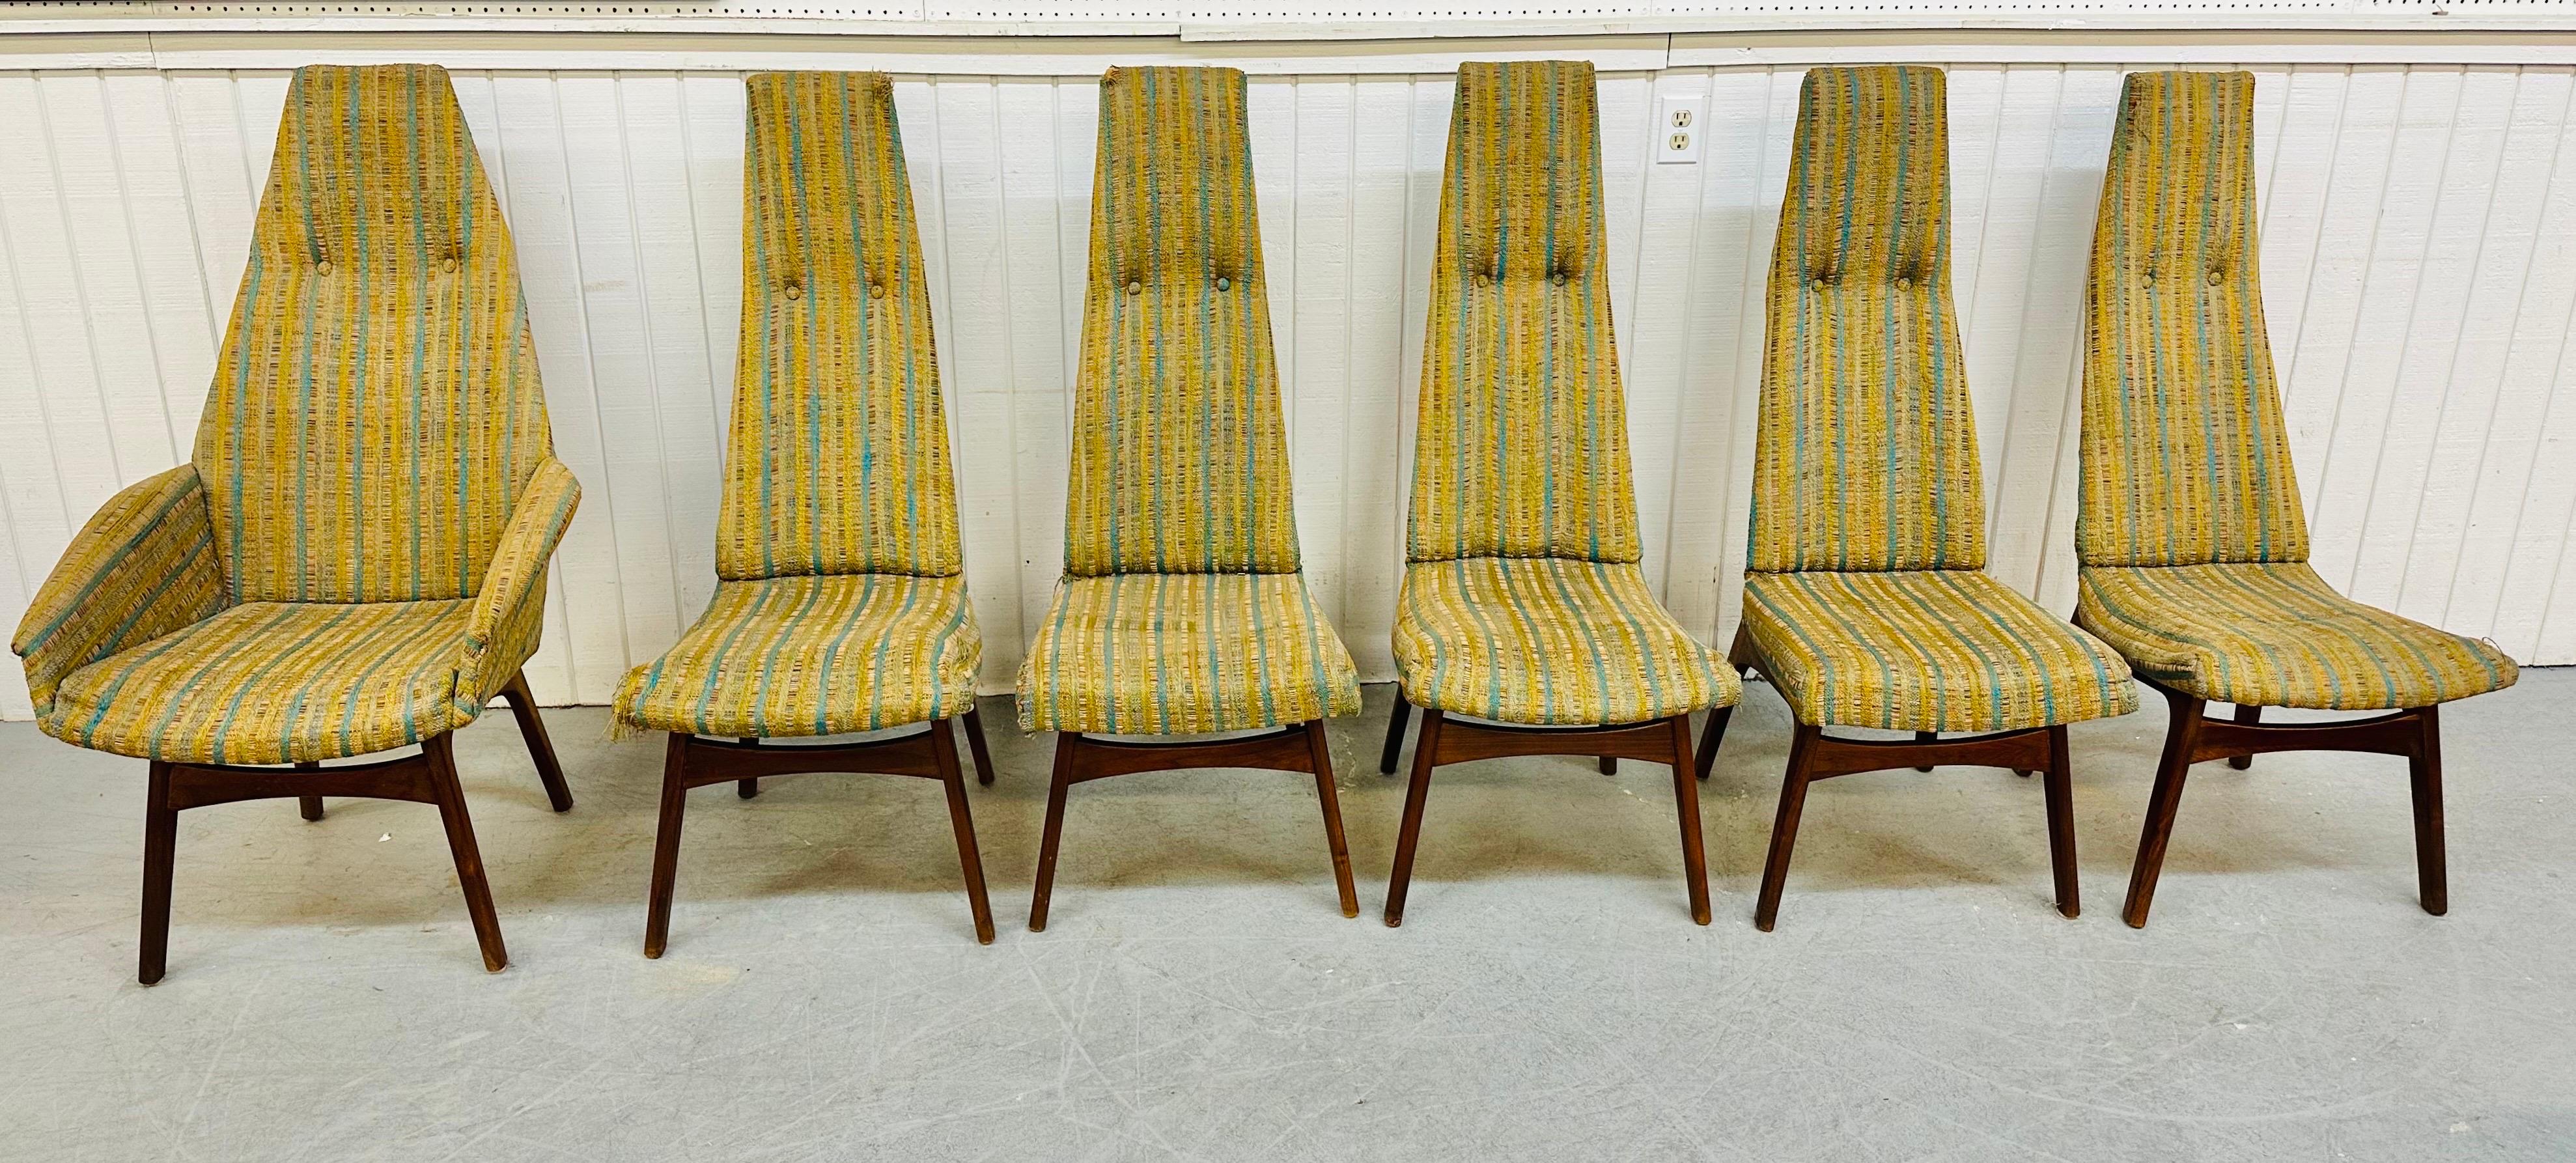 This listing is for a set of six Mid-Century Modern Adrian Pearsall High-Back Dining Chairs for Craft Associates. Featuring one arm chair, five straight chairs, original 1960’s green striped upholstery, and thick walnut legs. This is an exceptional